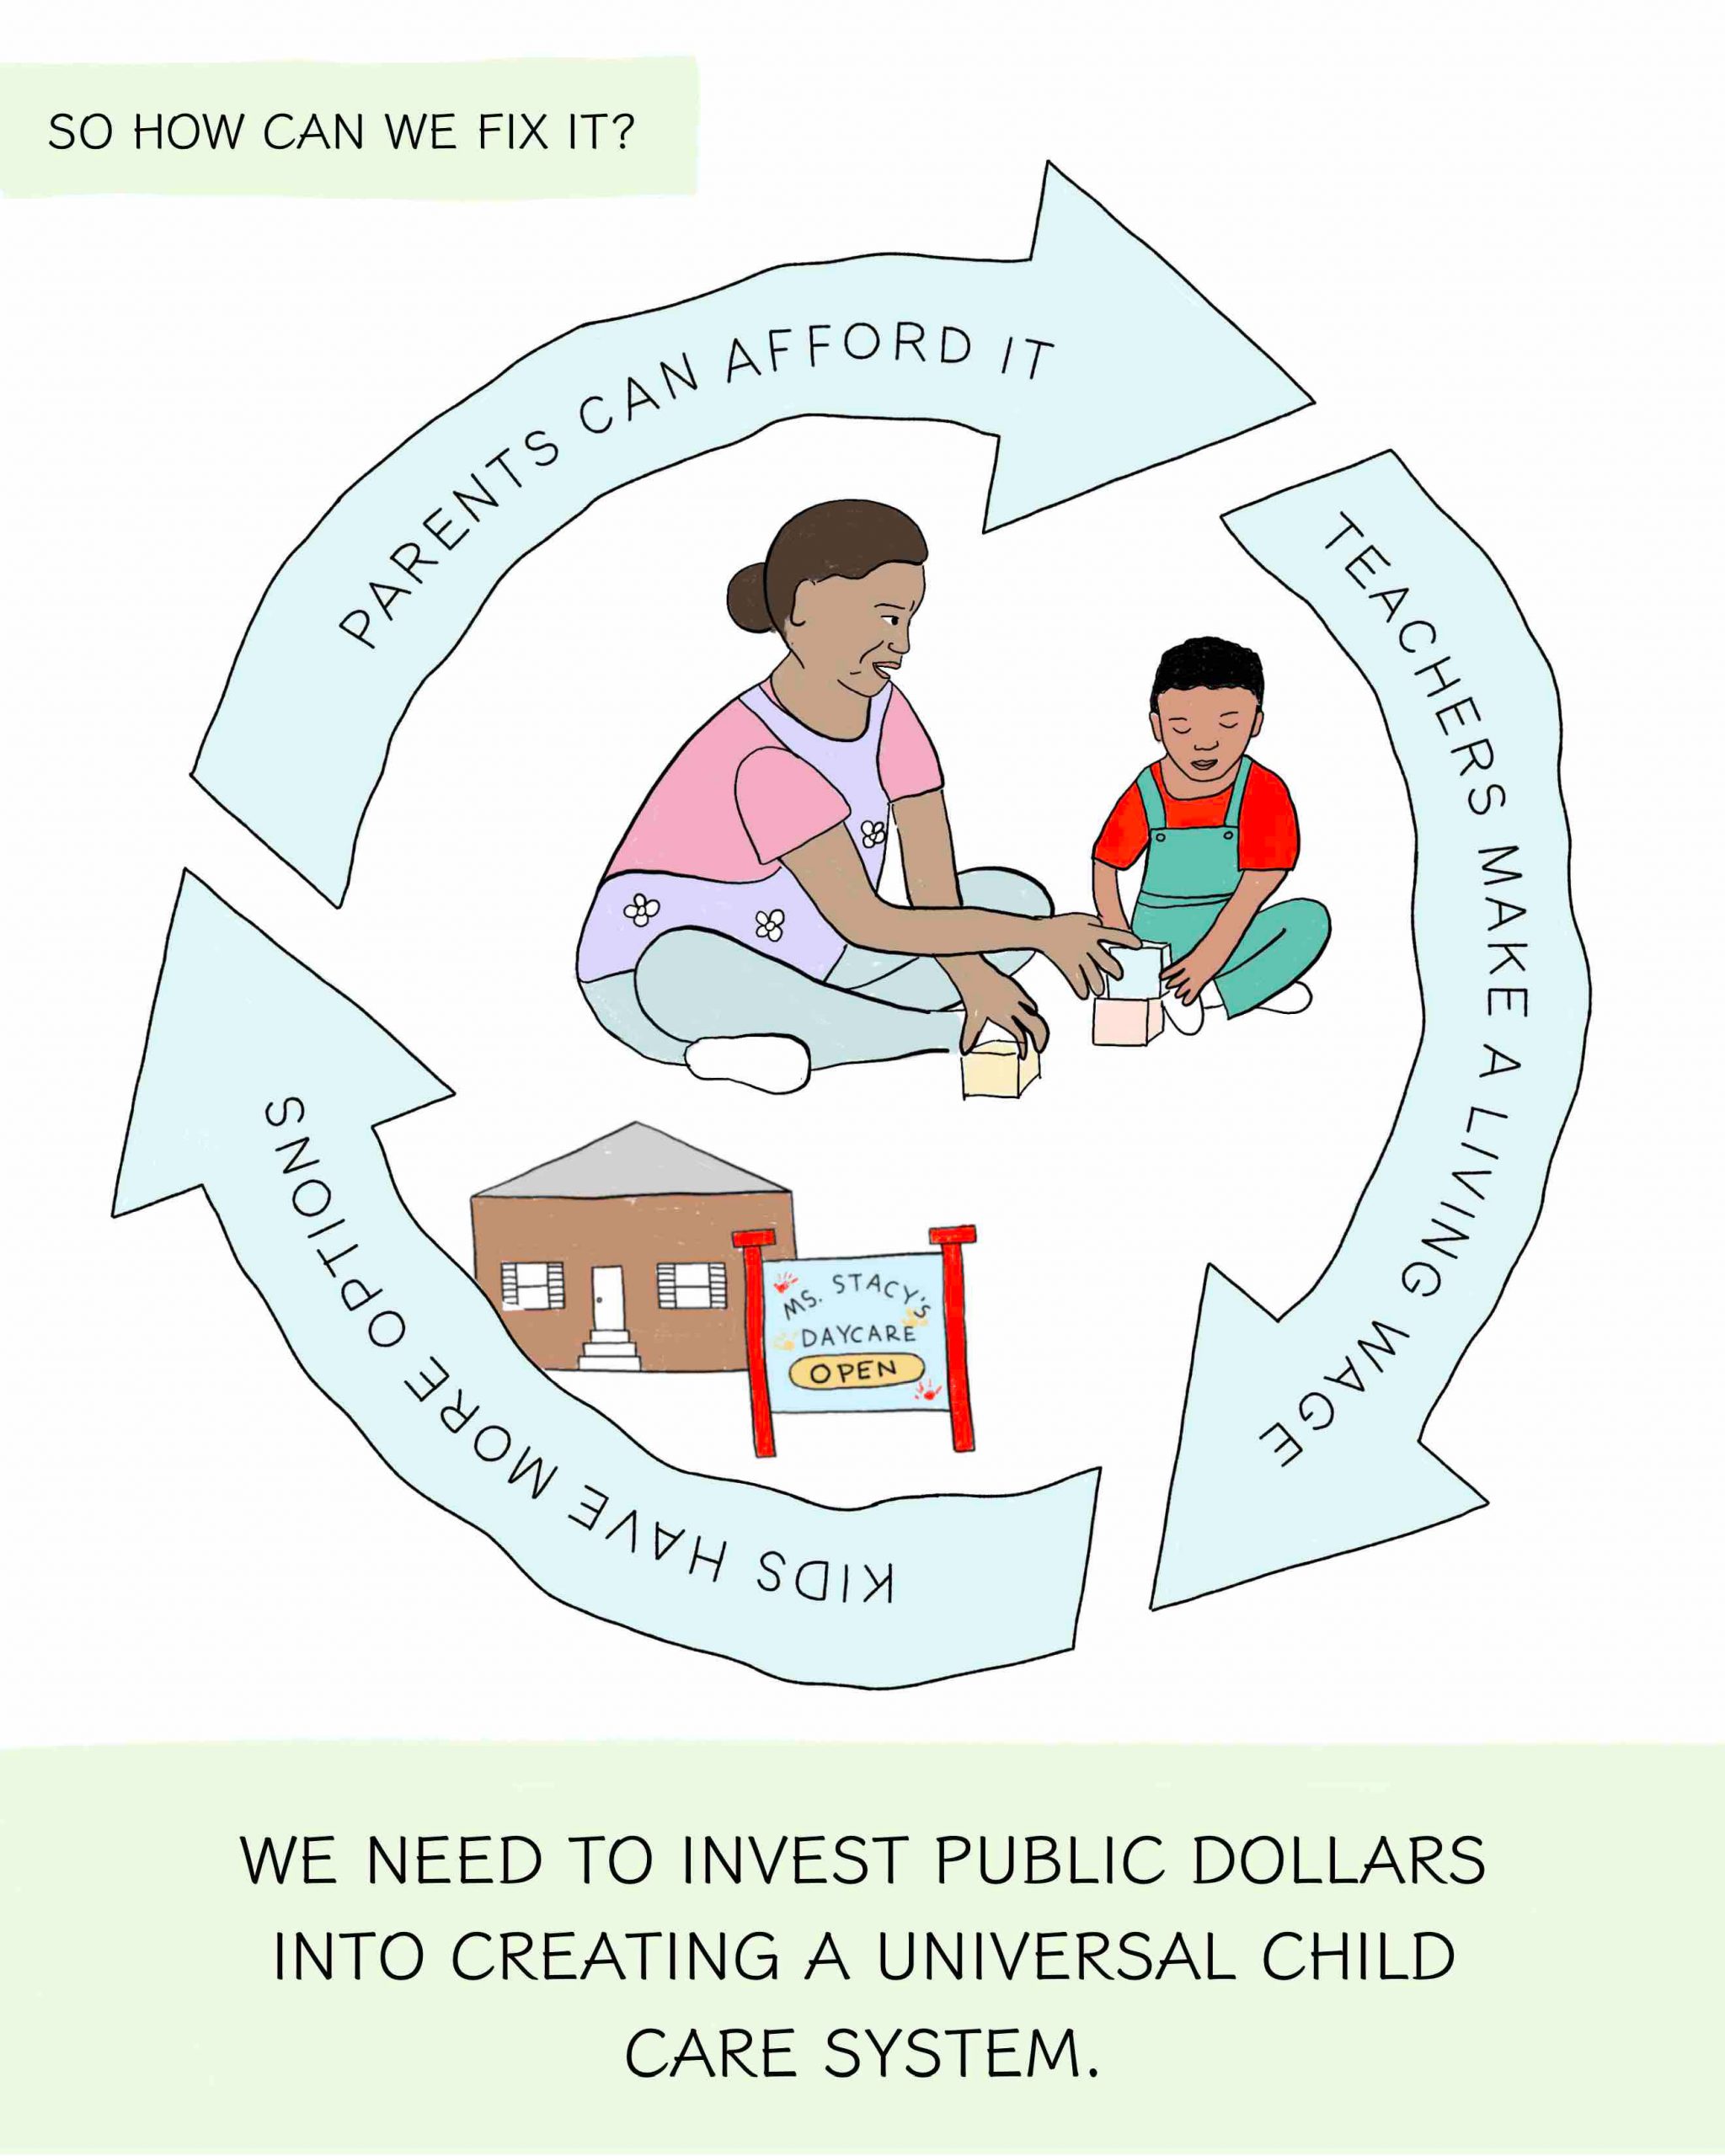 SO HOW CAN WE FIX IT? WE NEED TO INVEST PUBLIC DOLLARS INTO CREATING A UNIVERSAL CHILD CARE SYSTEM. A drawing of a child care building and worker with a child, along with a circular graphic.